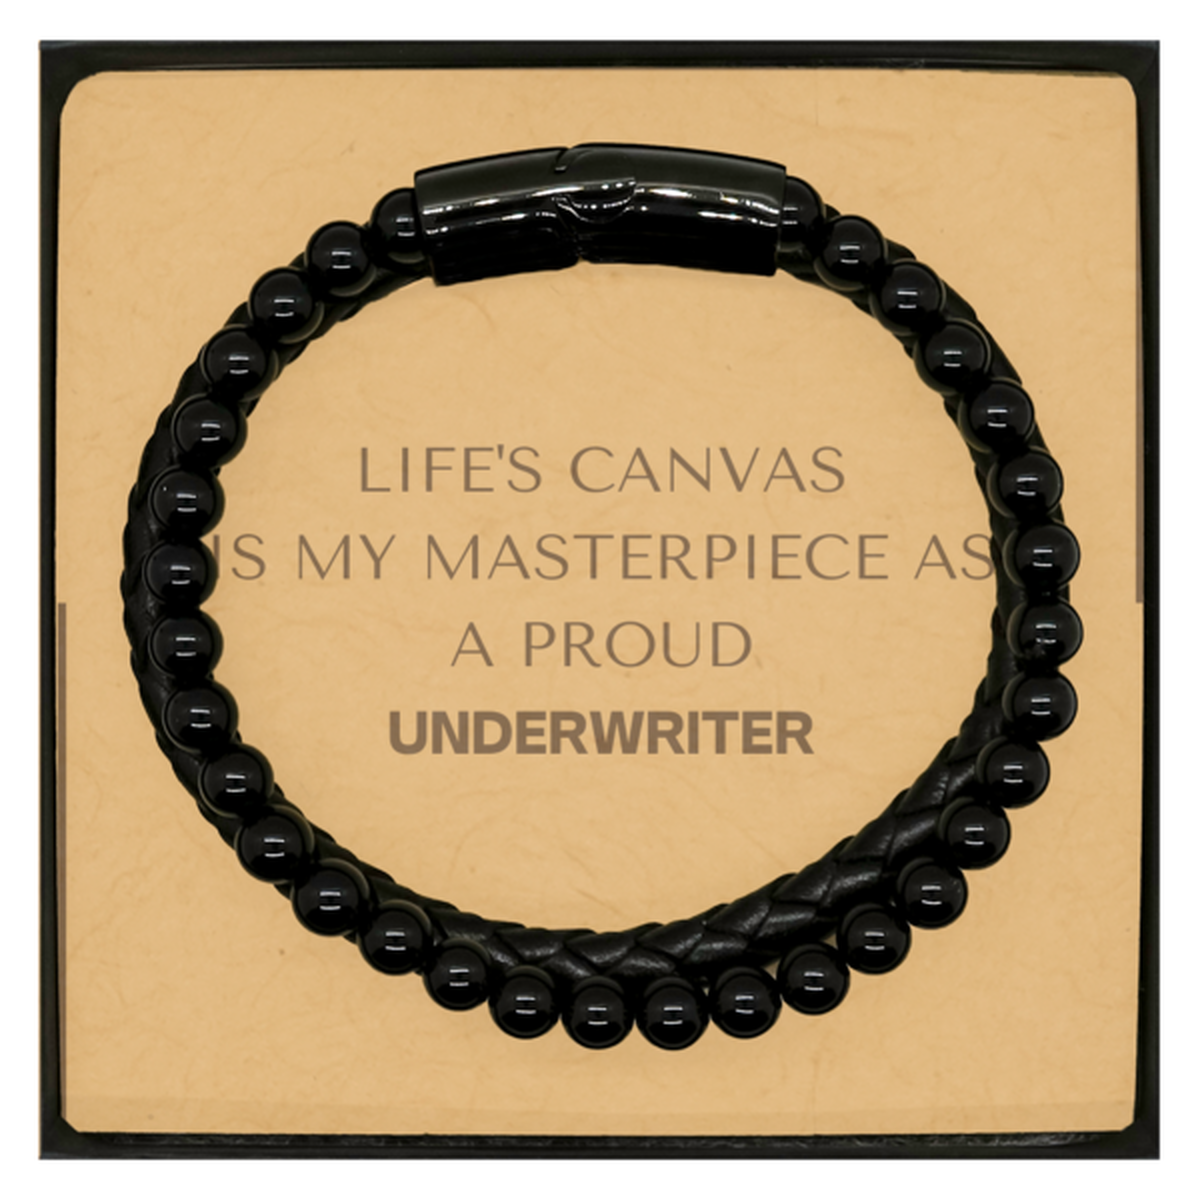 Proud Underwriter Gifts, Life's canvas is my masterpiece, Epic Birthday Christmas Unique Stone Leather Bracelets For Underwriter, Coworkers, Men, Women, Friends